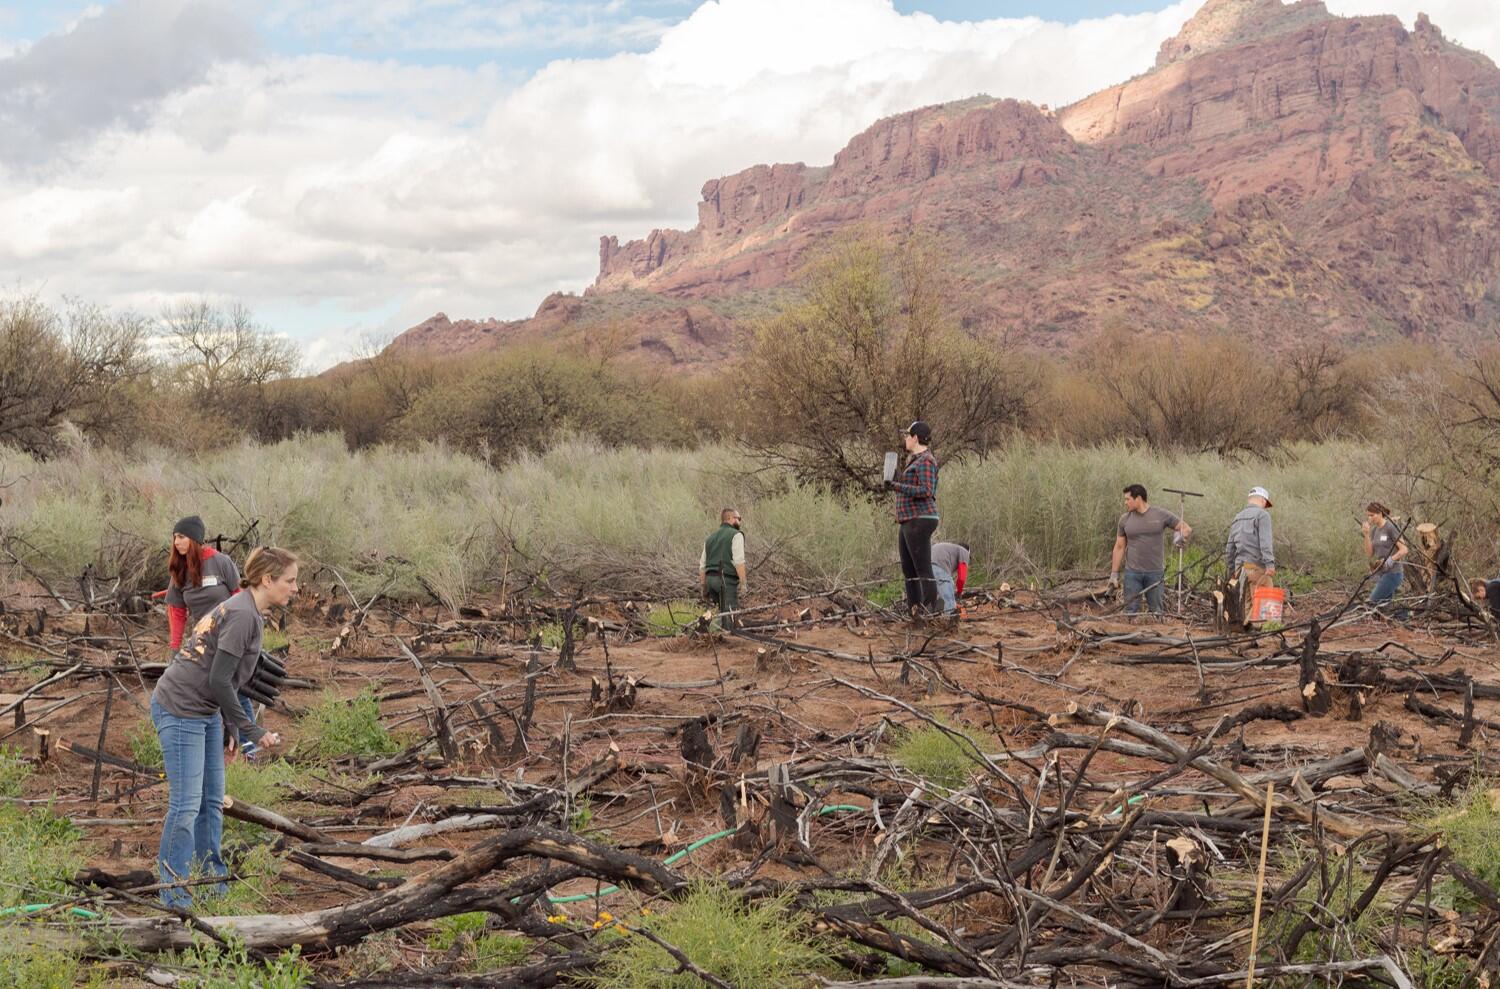 Volunteers clear burnt vegetation and plant new trees along the lower Salt River with Red Mountain in the background.